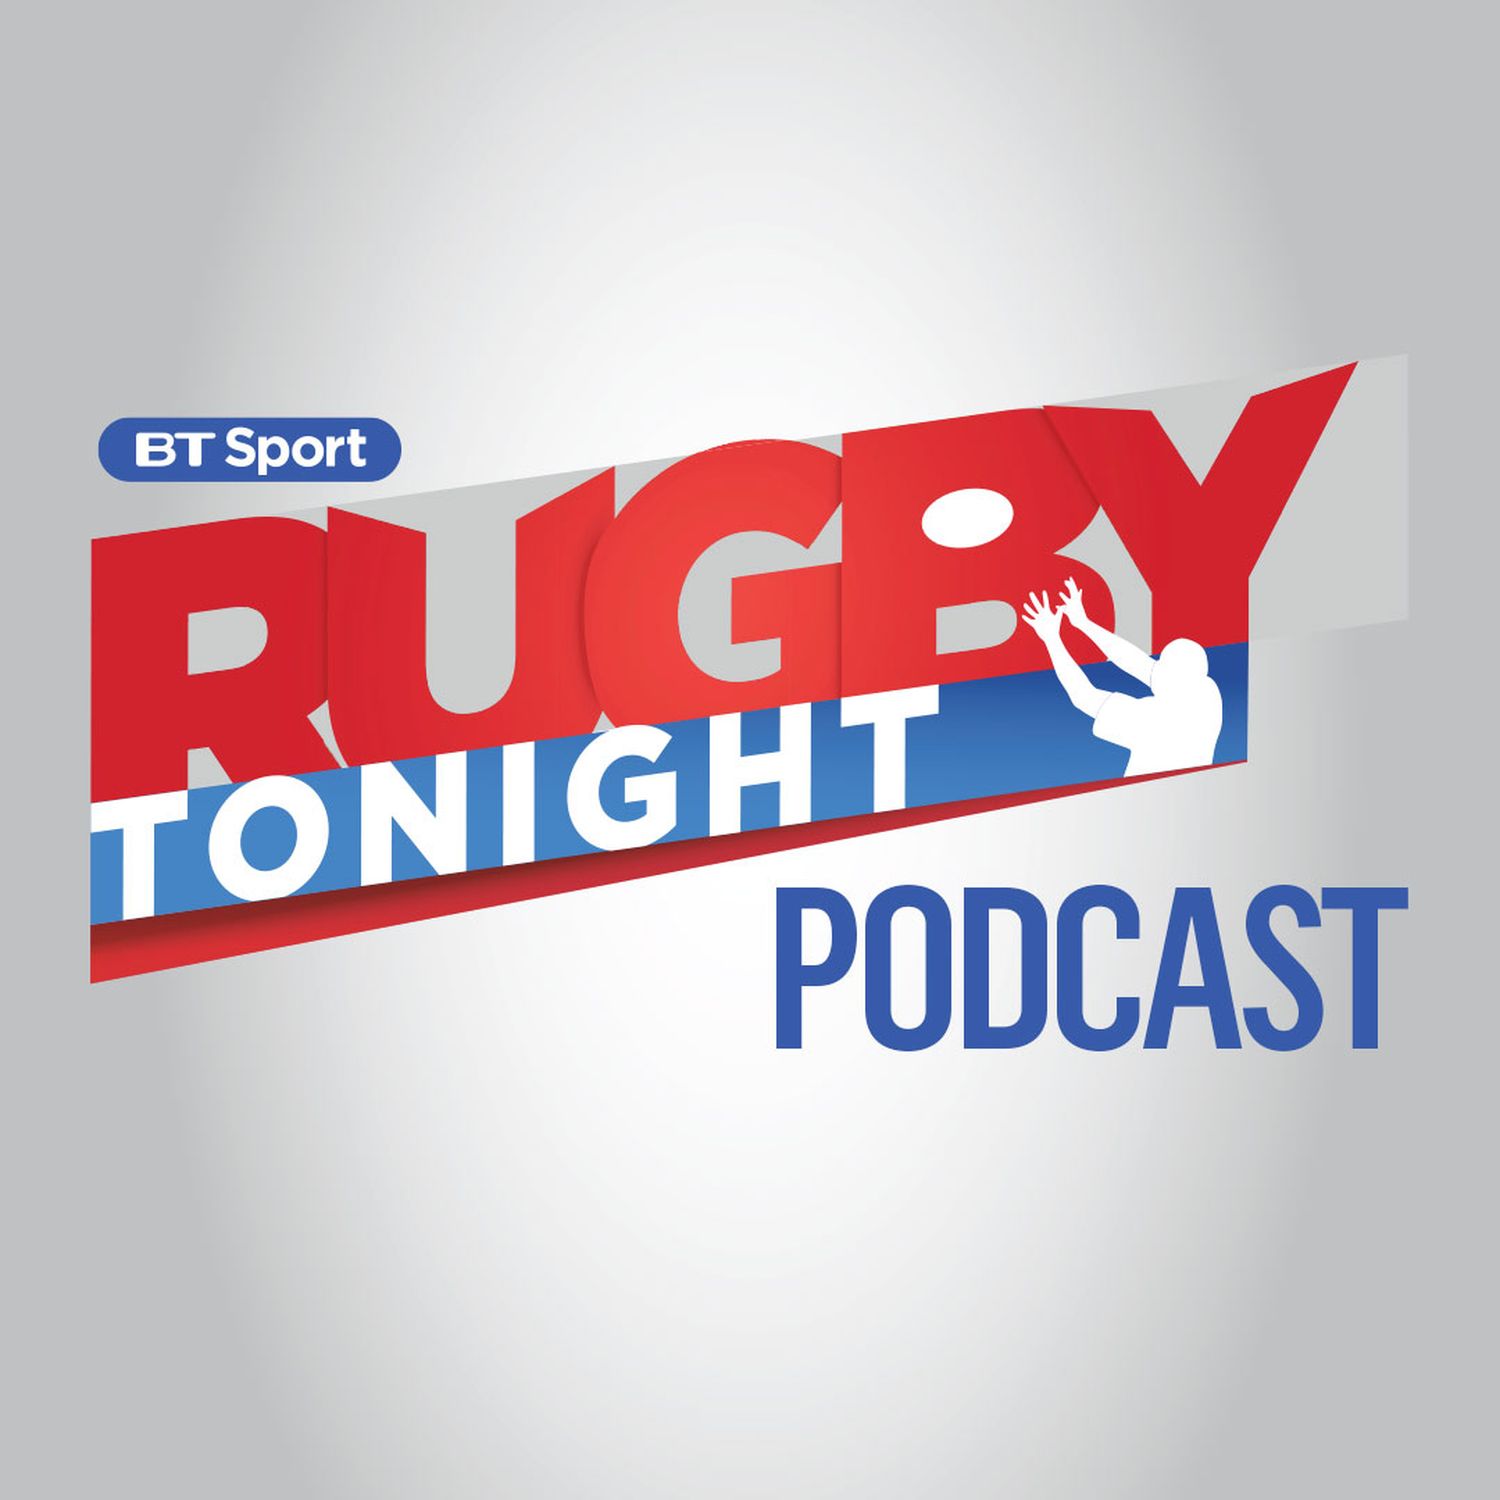 Rugby Tonight Podcast on Apple Podcasts